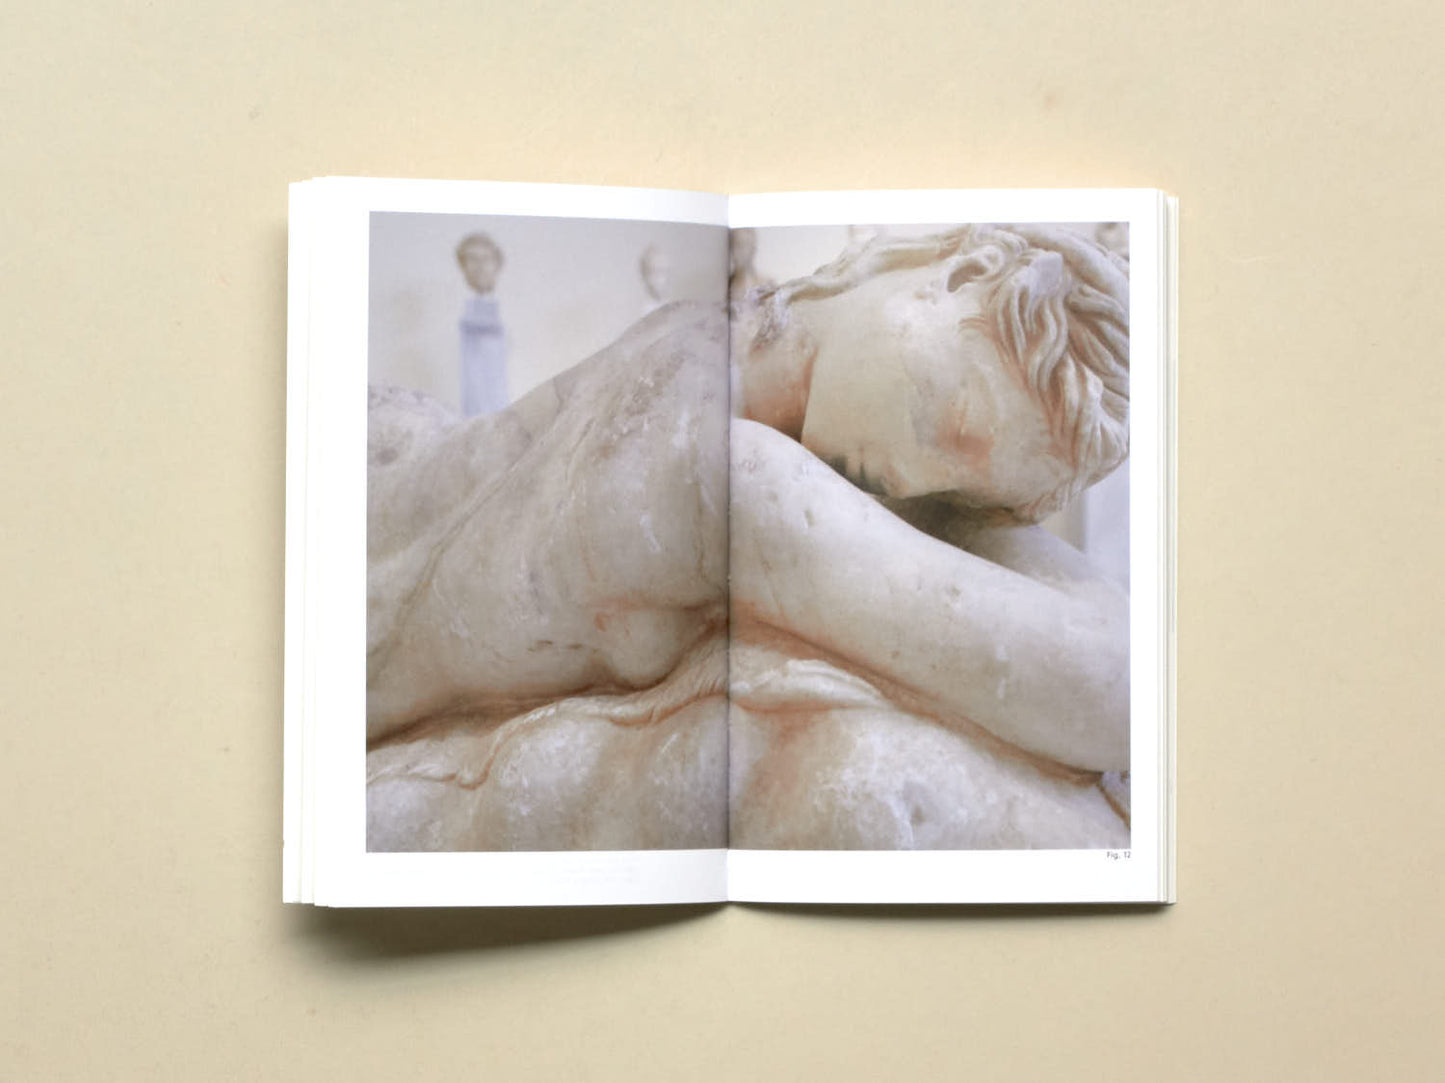 Juan Duque, David Bergé (eds.), The Sleeping Hermaphrodite: Waking up from a Lethargic Confinement